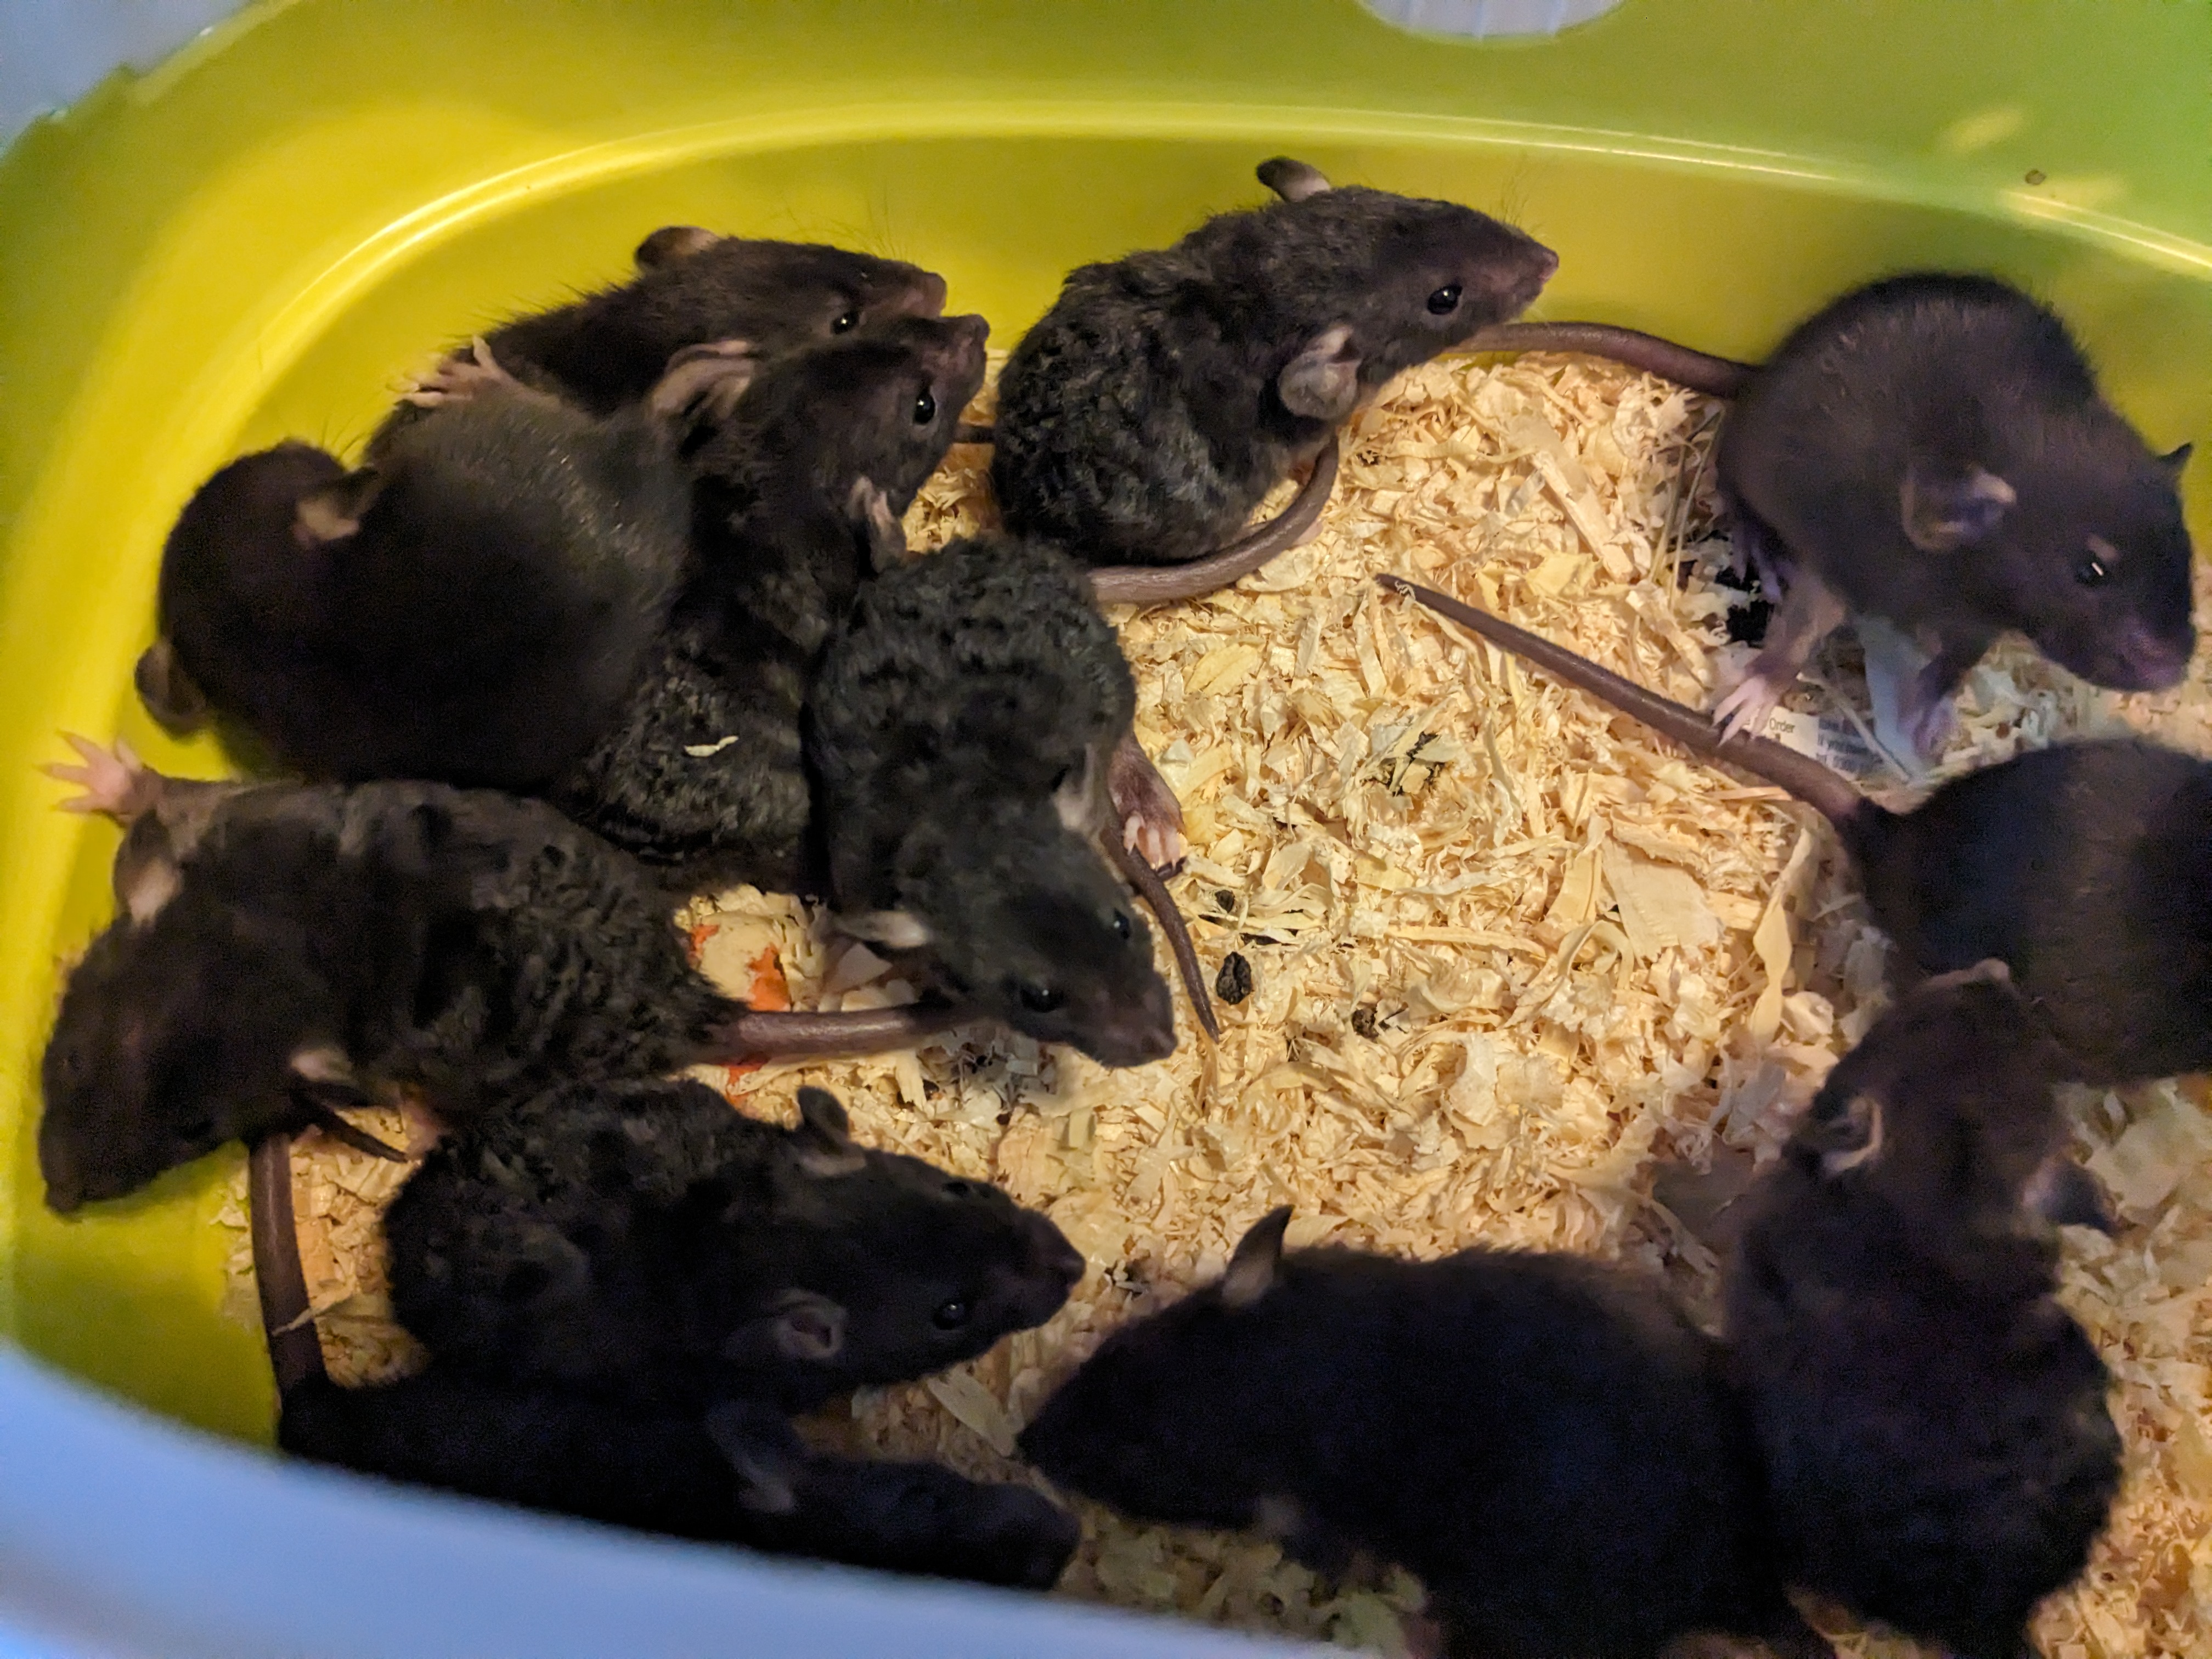 7 days old